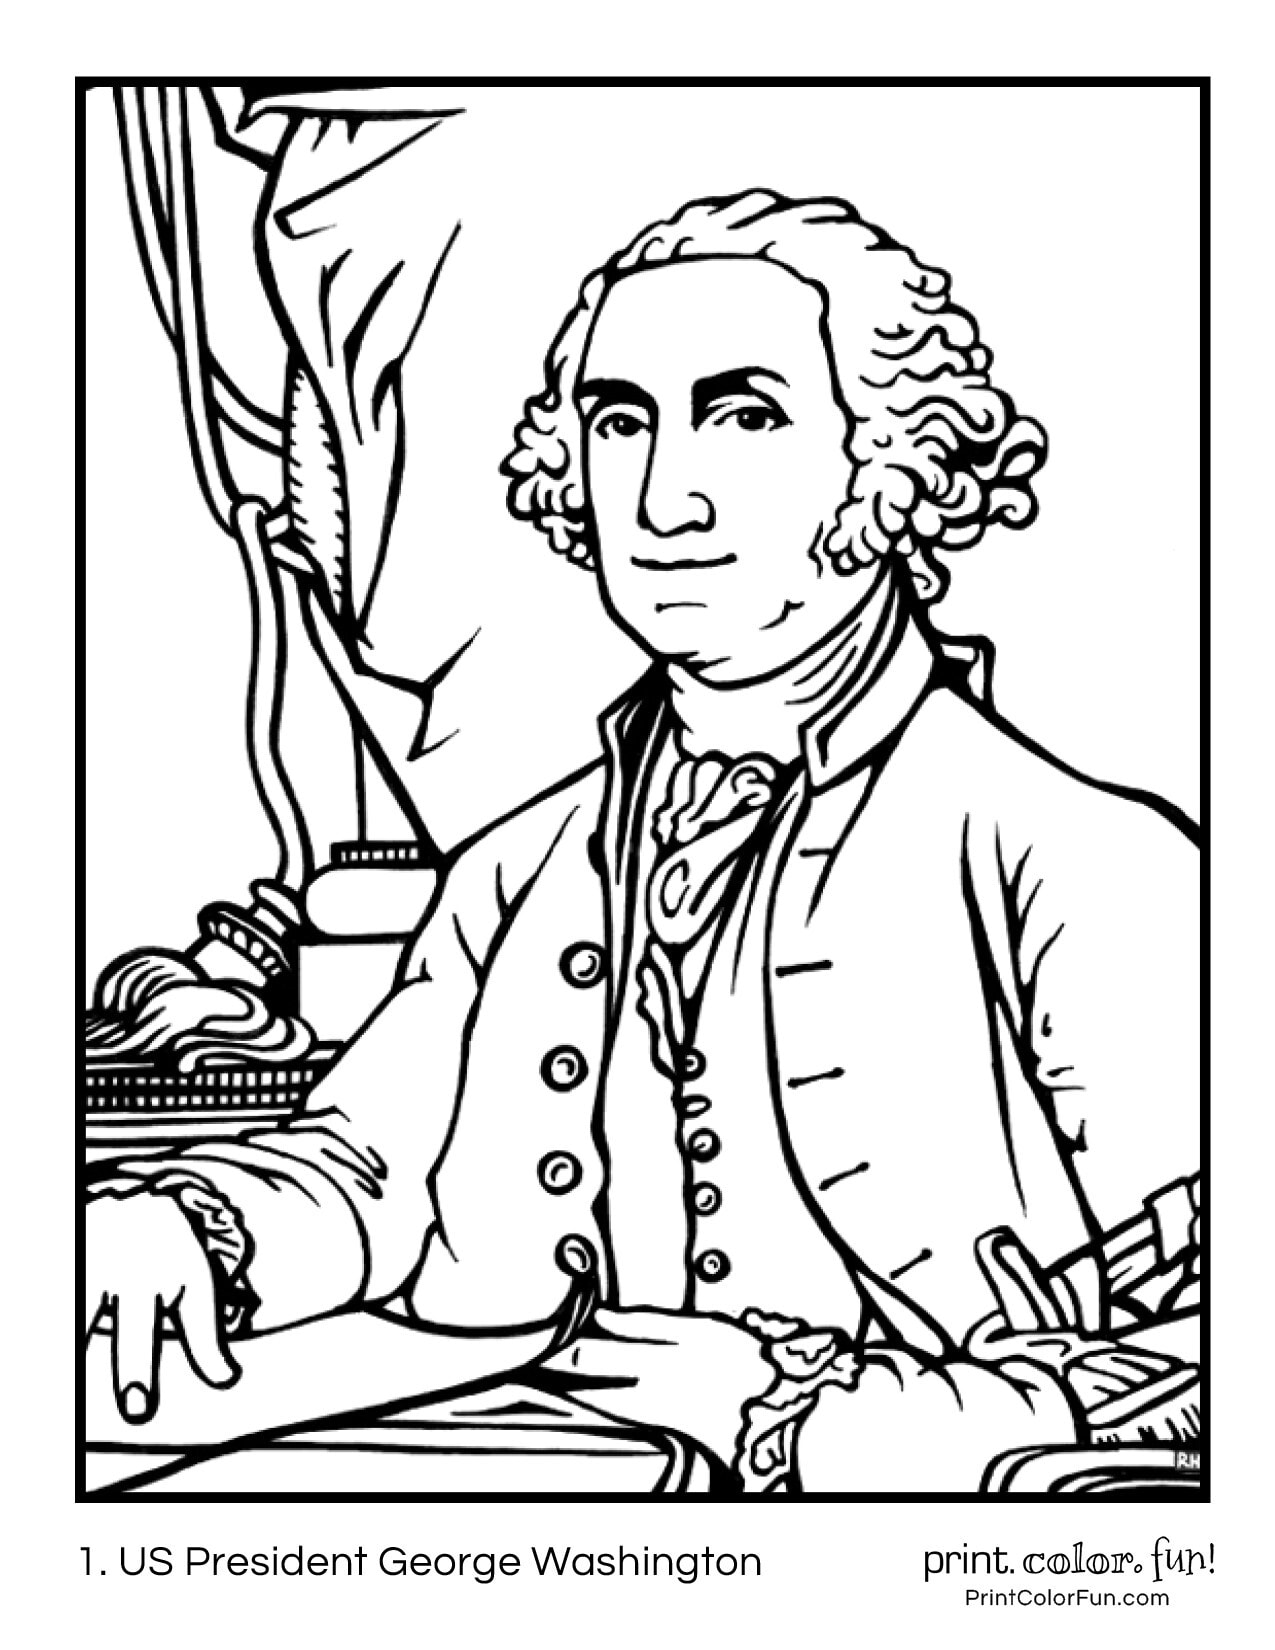 US Presidents coloring pages: Printables of the first 42 American ...